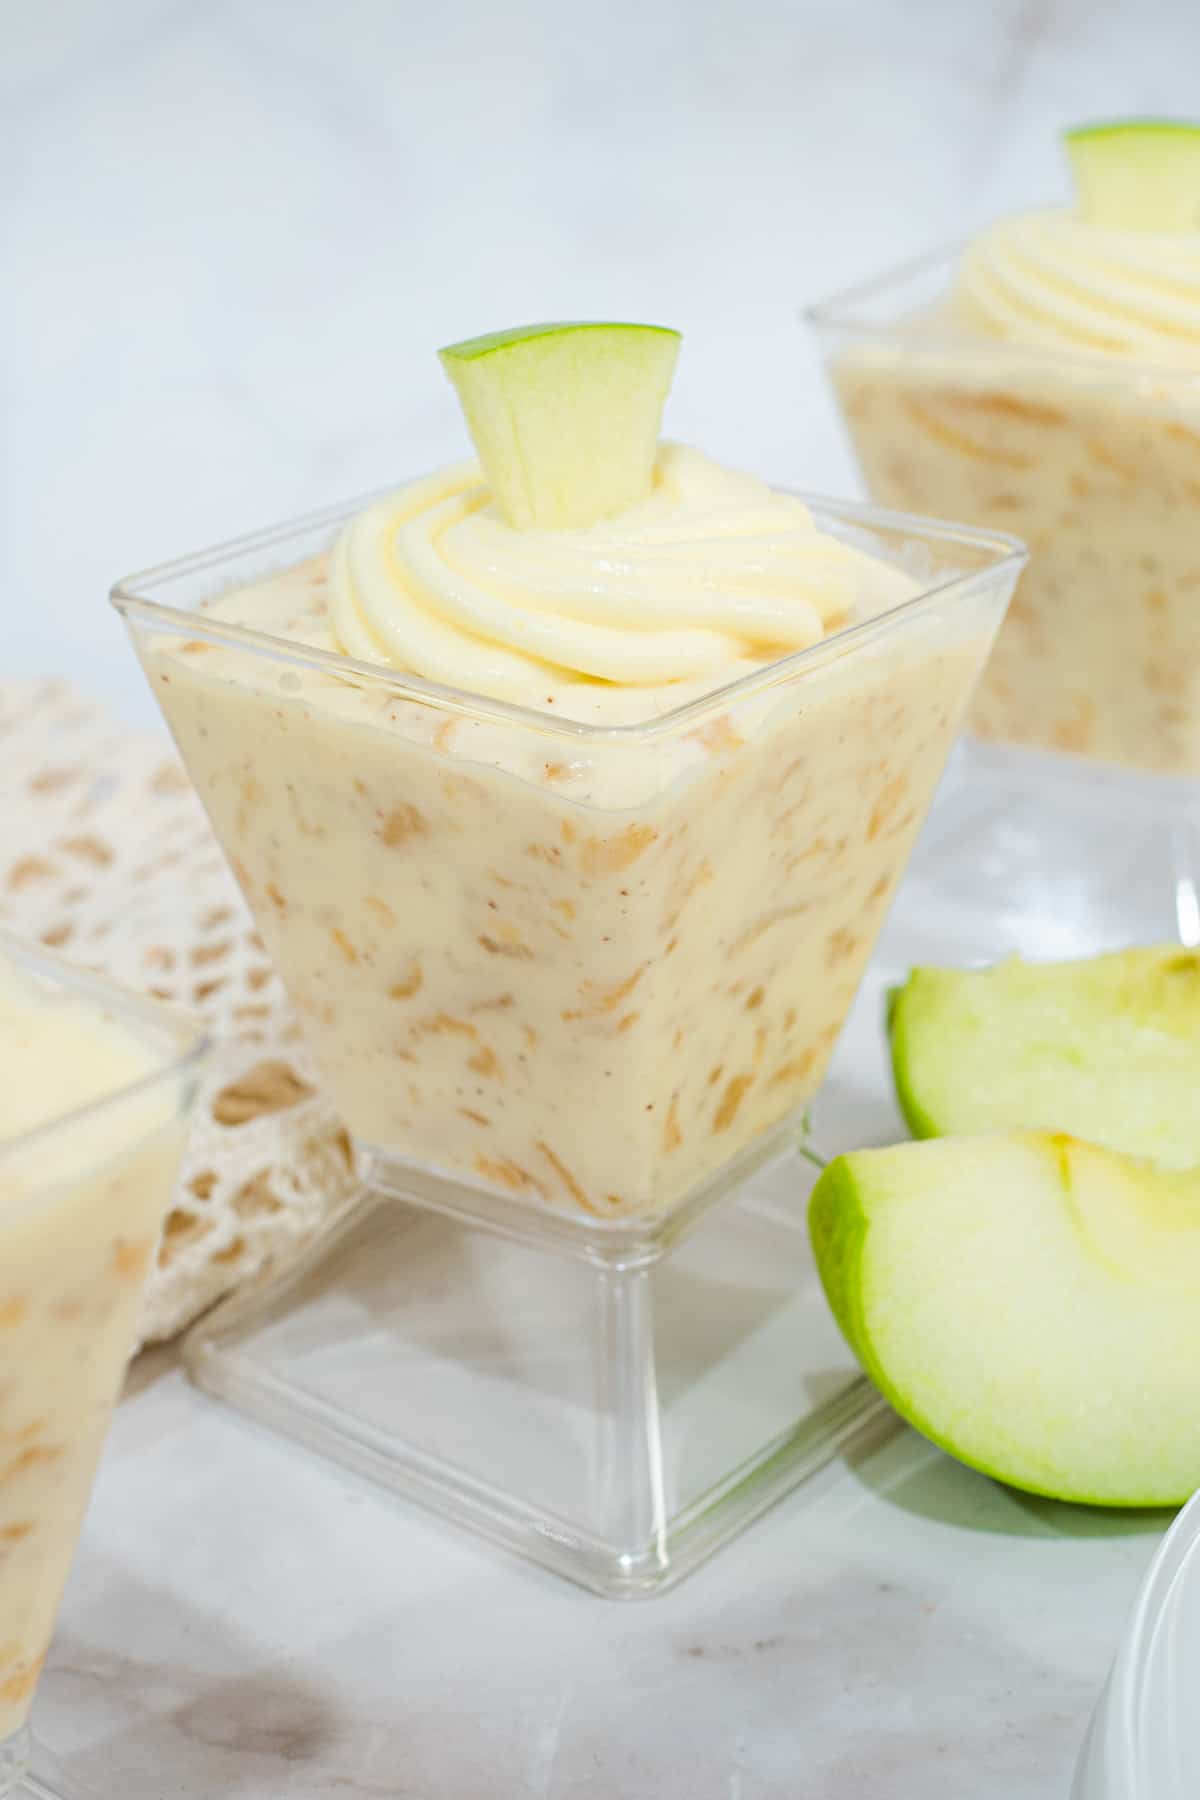 Apple mousse in a cup garnished with a slice of apple.